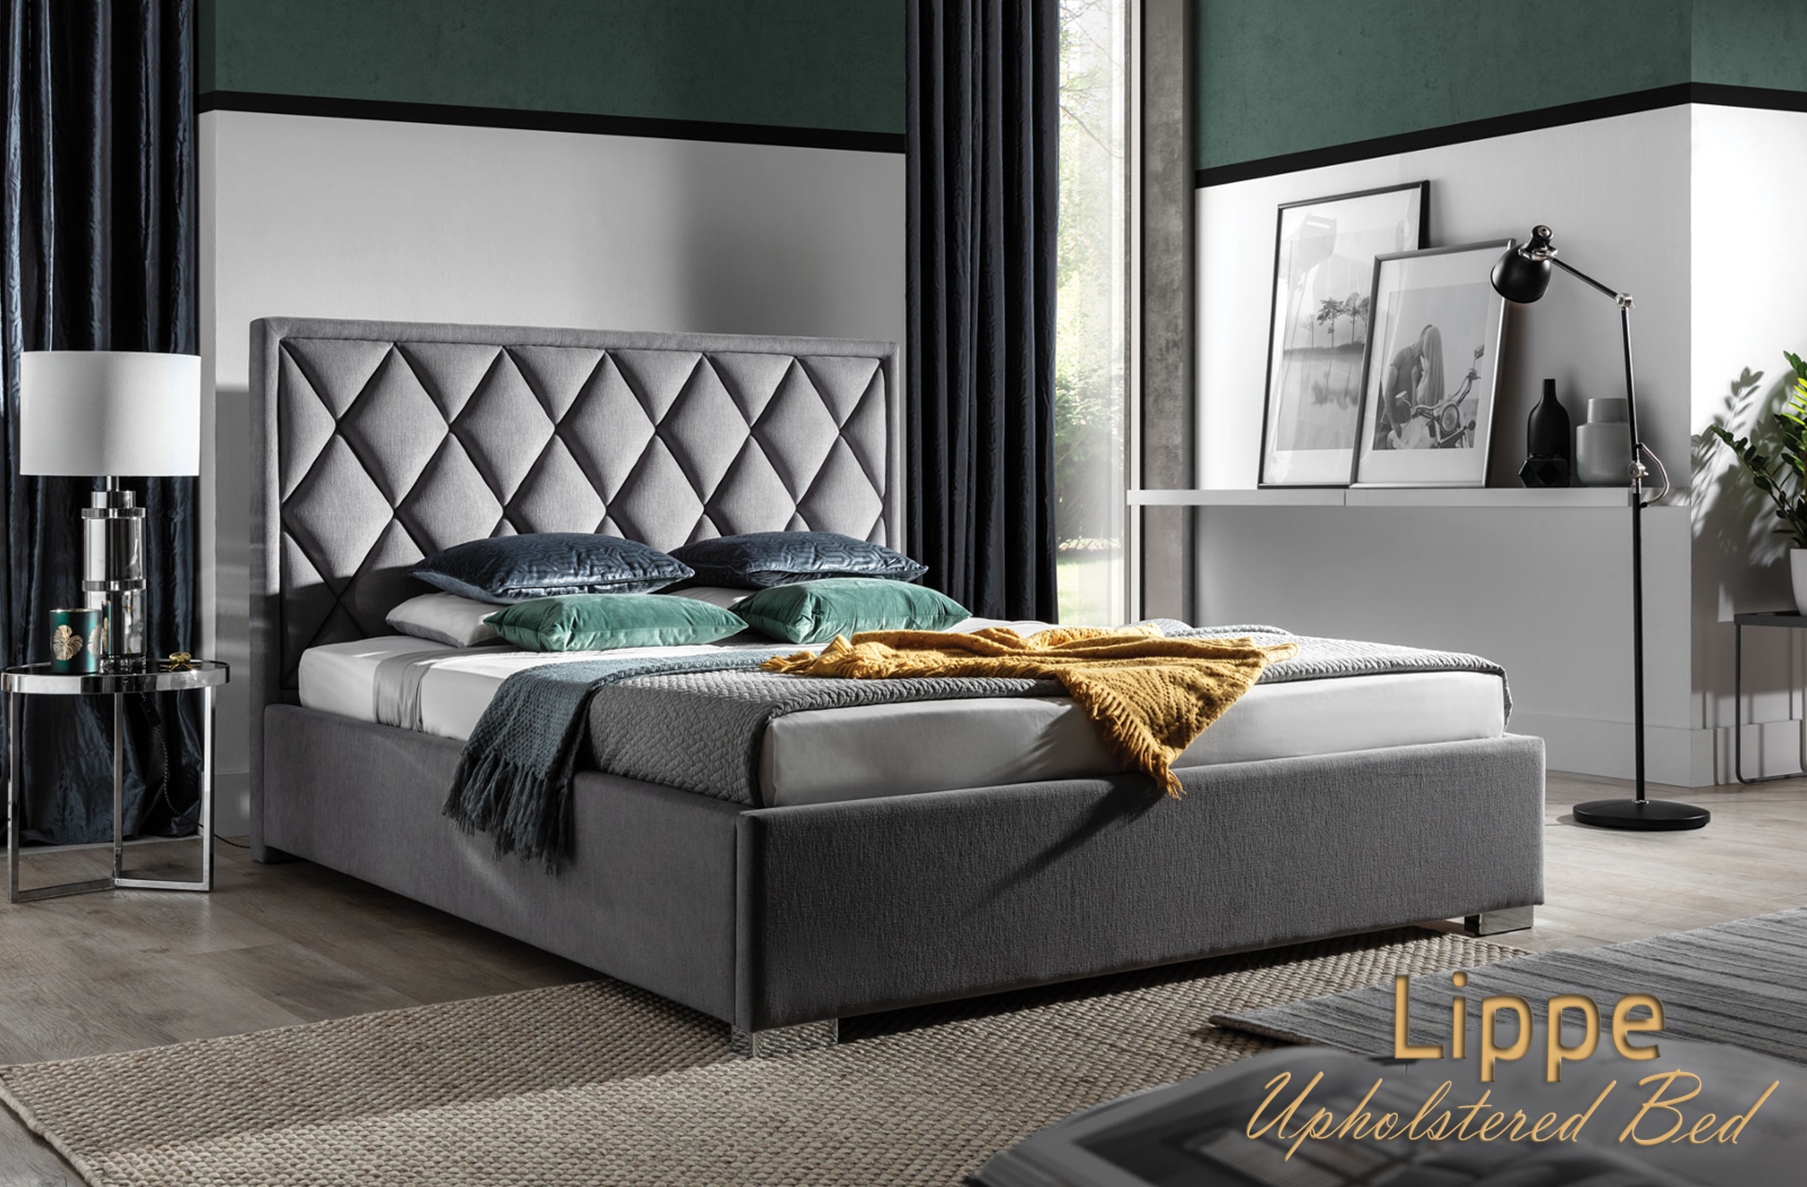 Lippe Upholstered Bed, Cheap